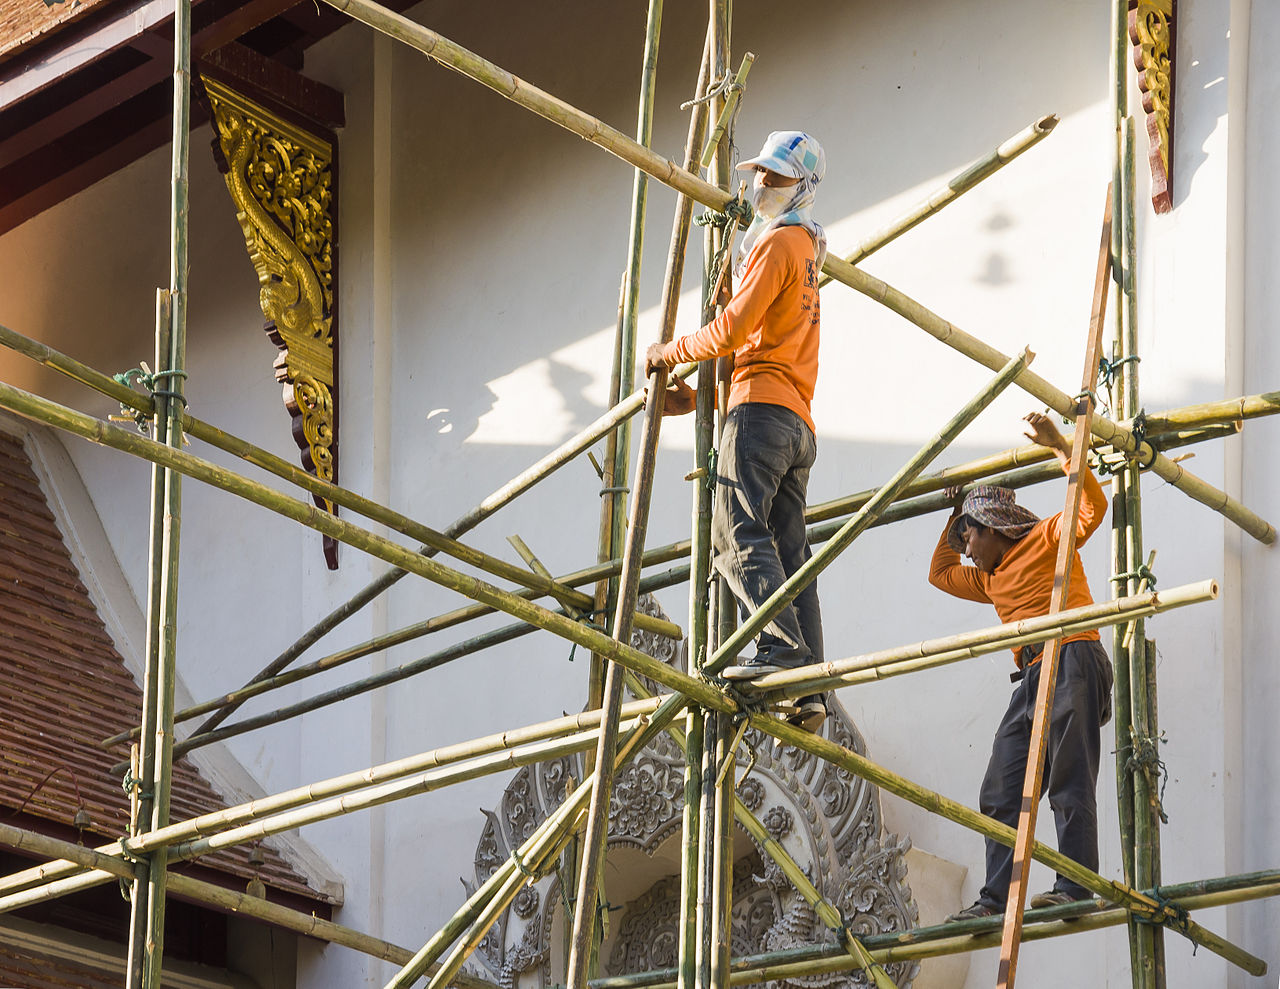 Workers on a bamboo scaffolding during renovation work at Wat Saen Muang Ma Luang in Chiang Ma